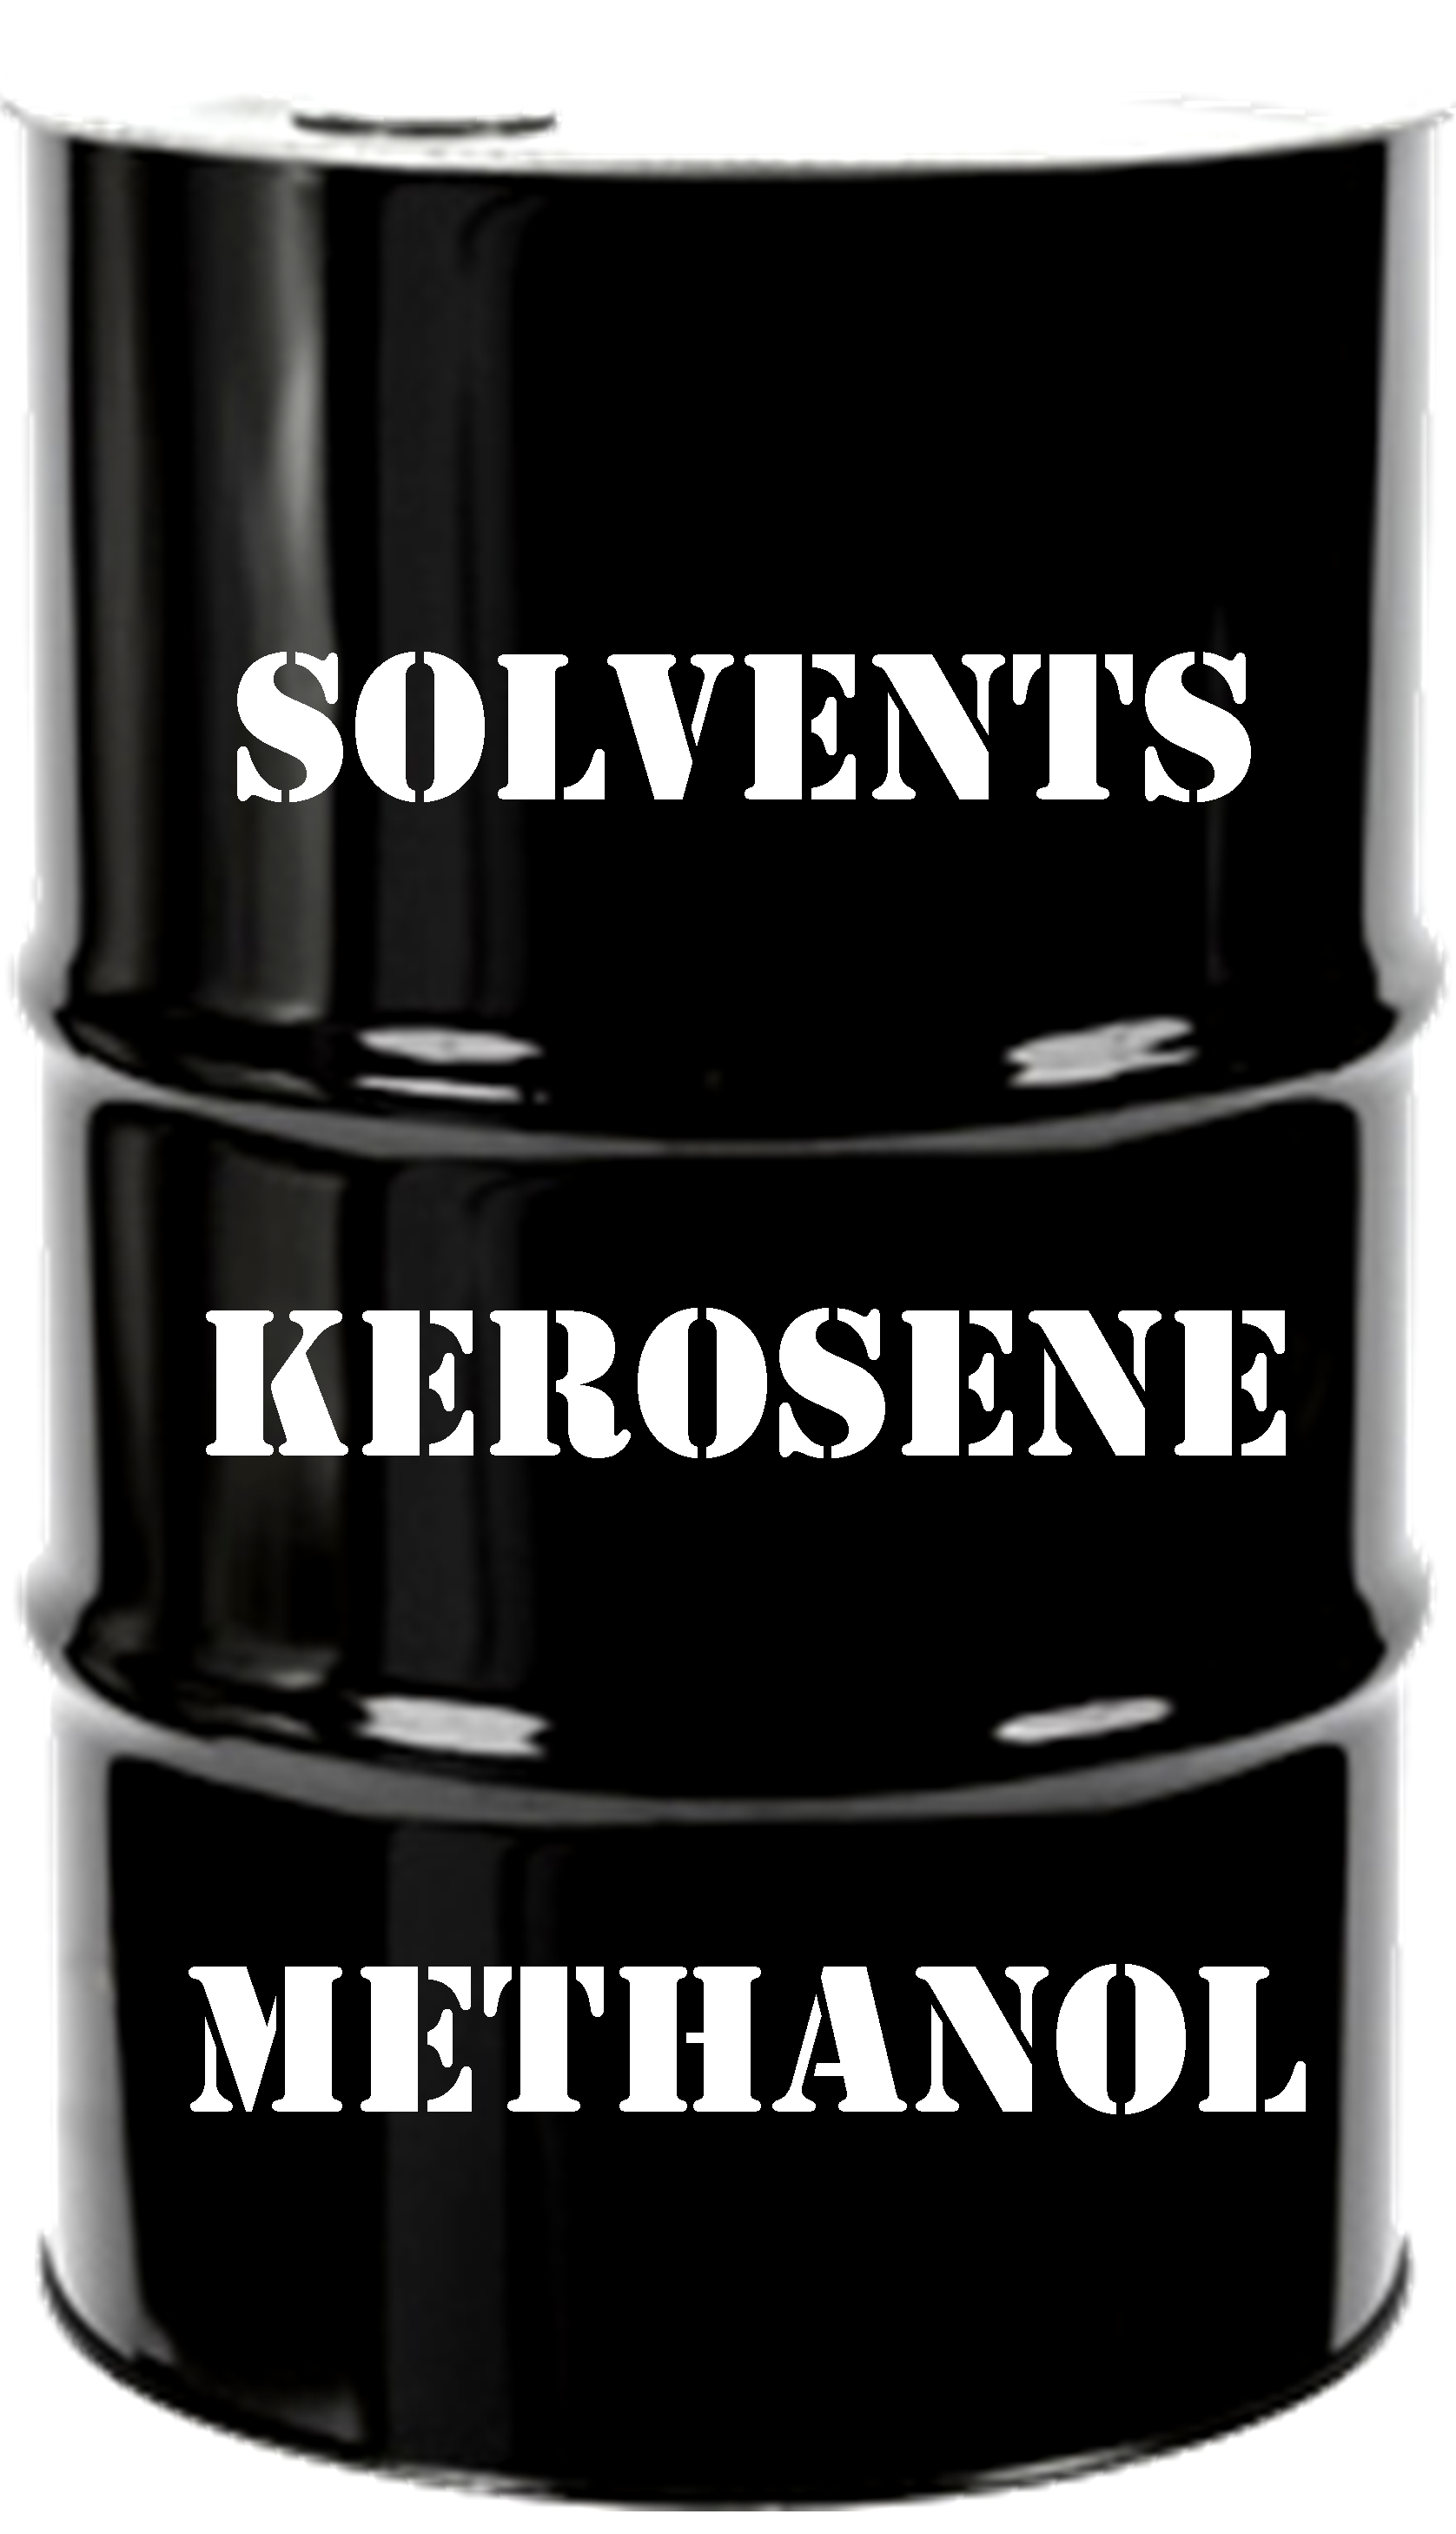 Solvents ICON for Website